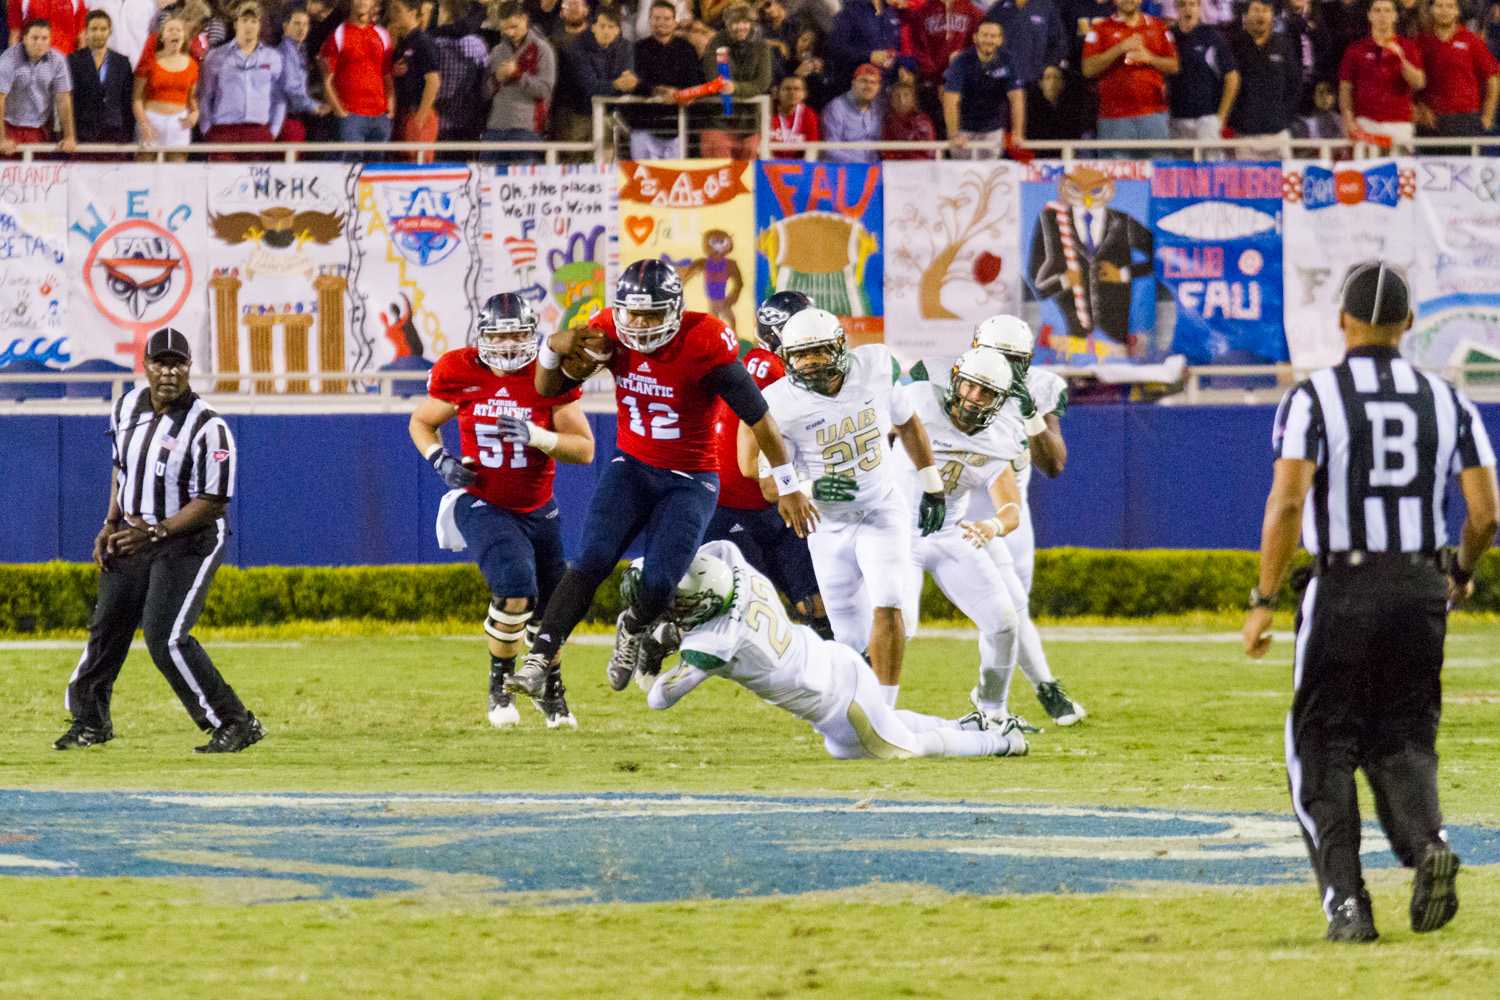 [ Mohammed F Emran | Web Editor ]  Quarterback Jaquez Johnson rushes for 18 yards to the FAU 46 for a first down. 